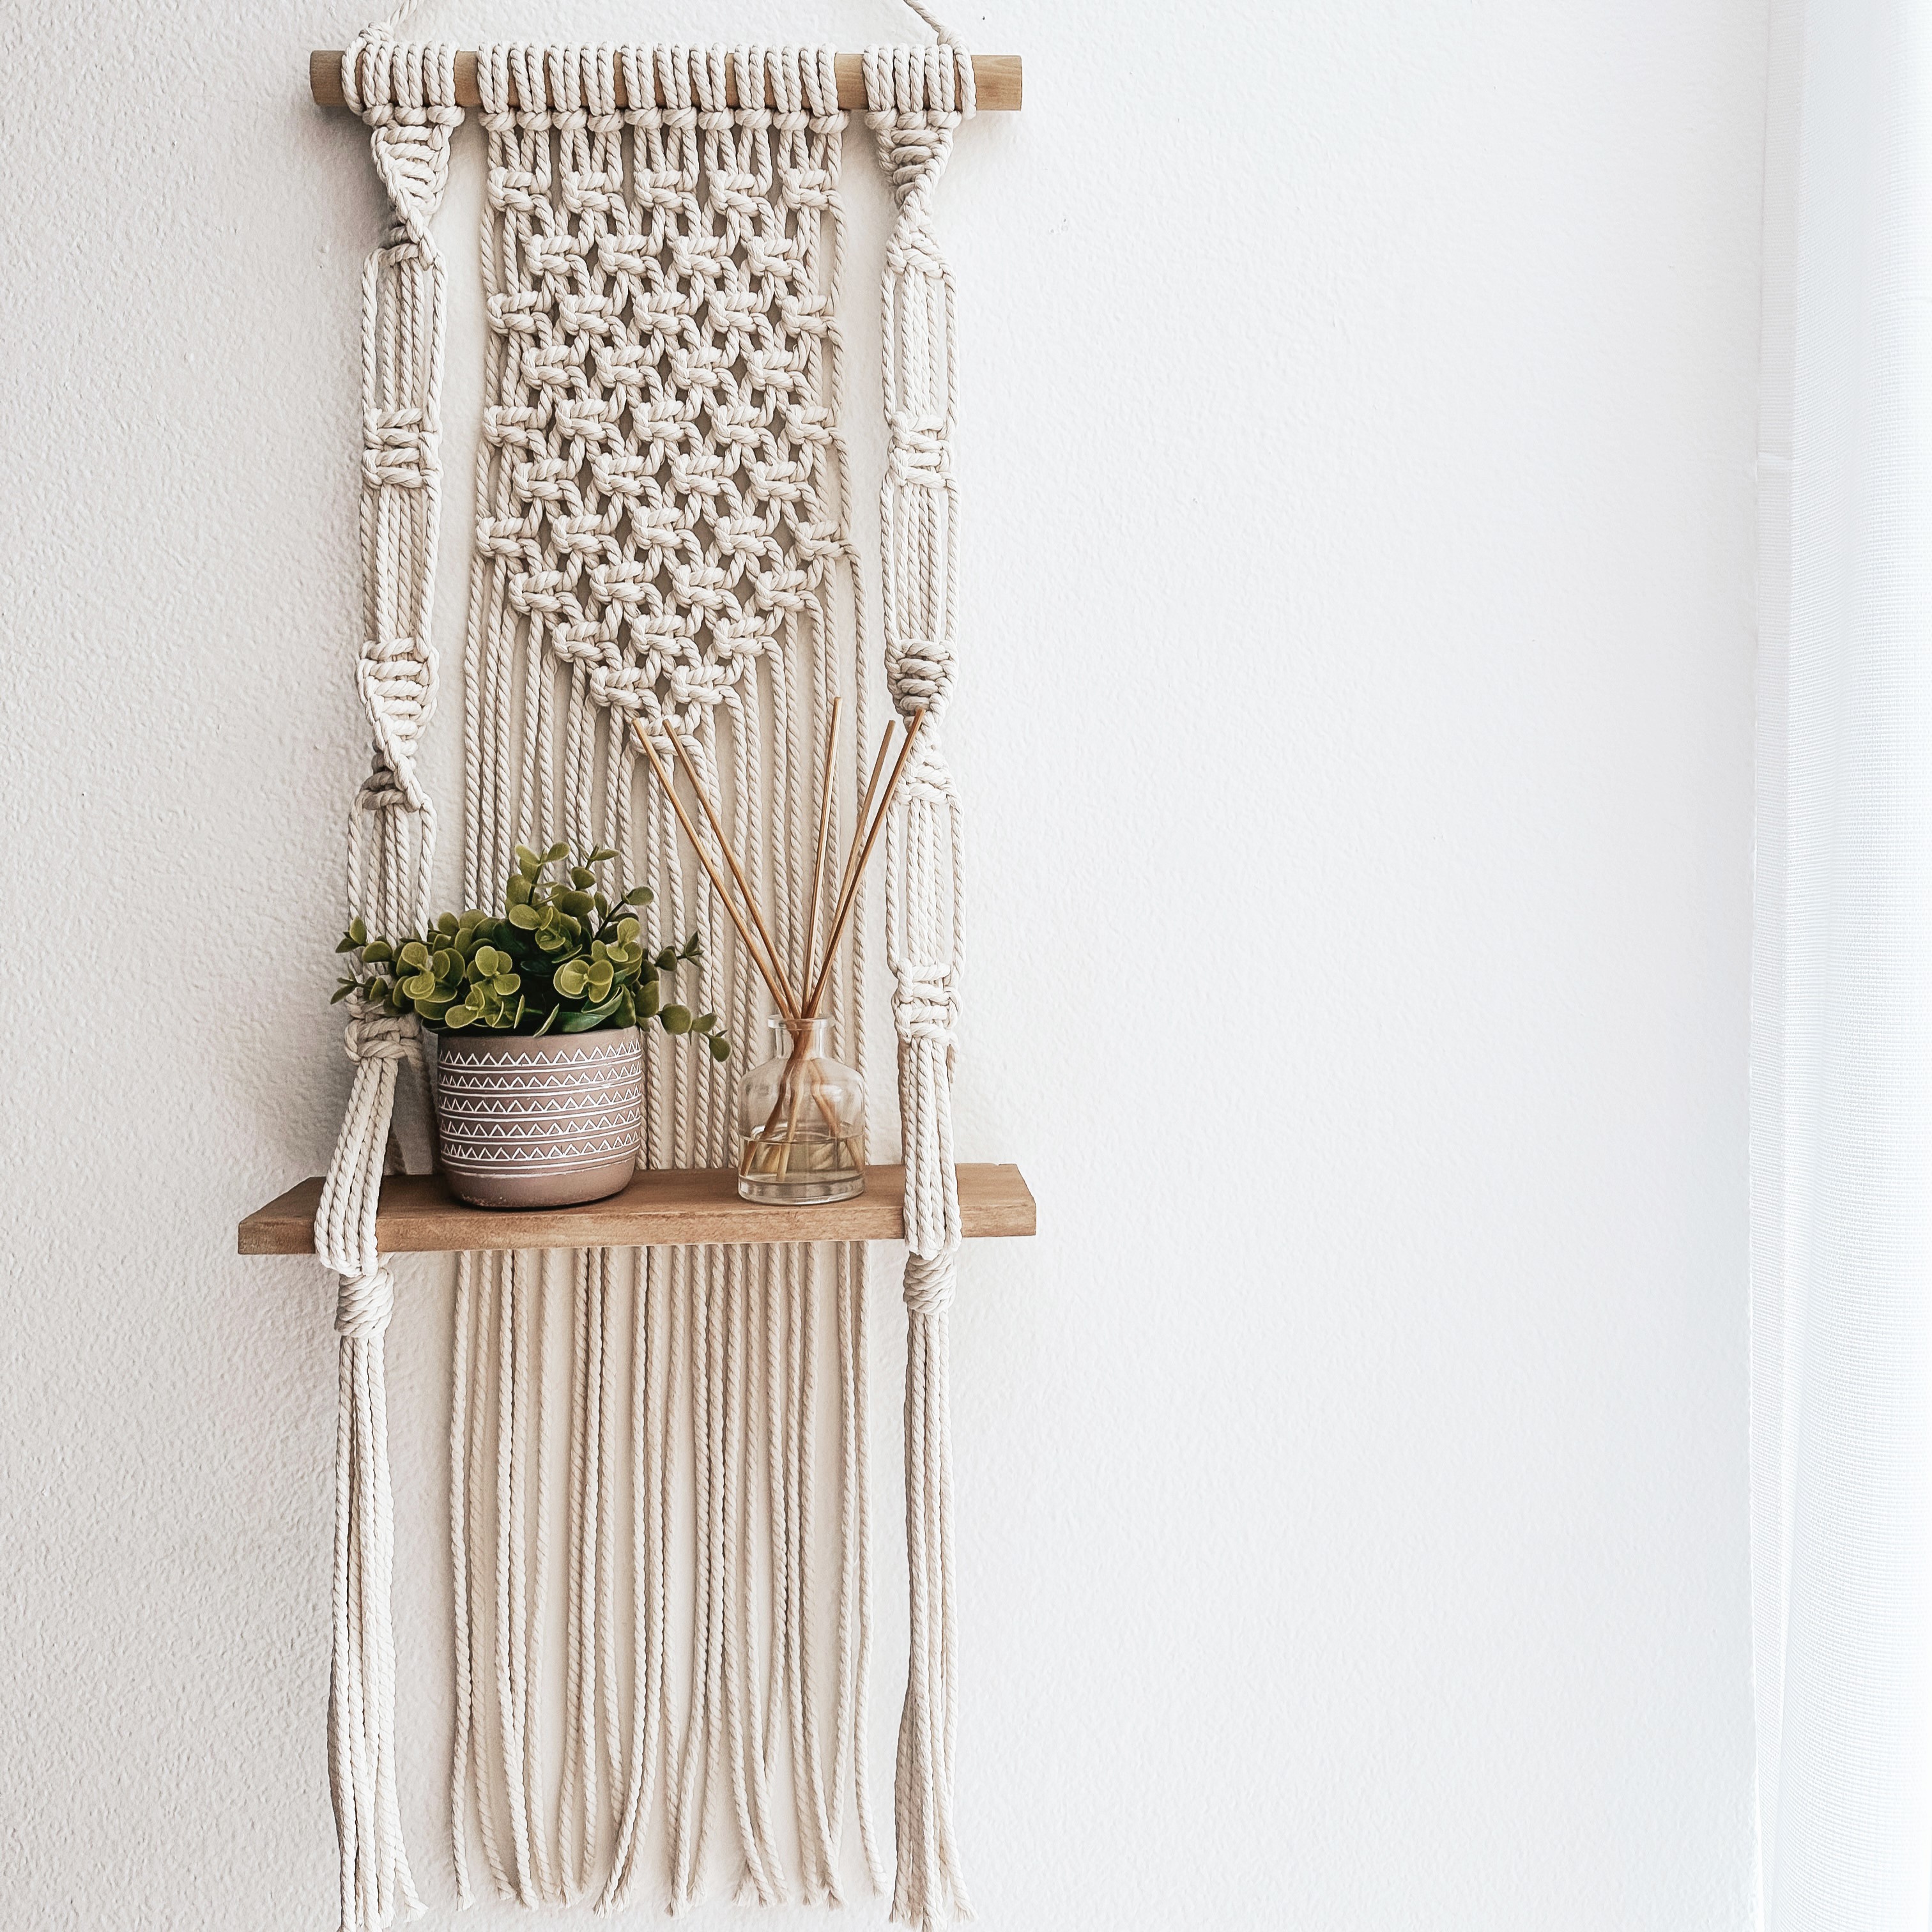 wall hanging macrame shelf with potted plant